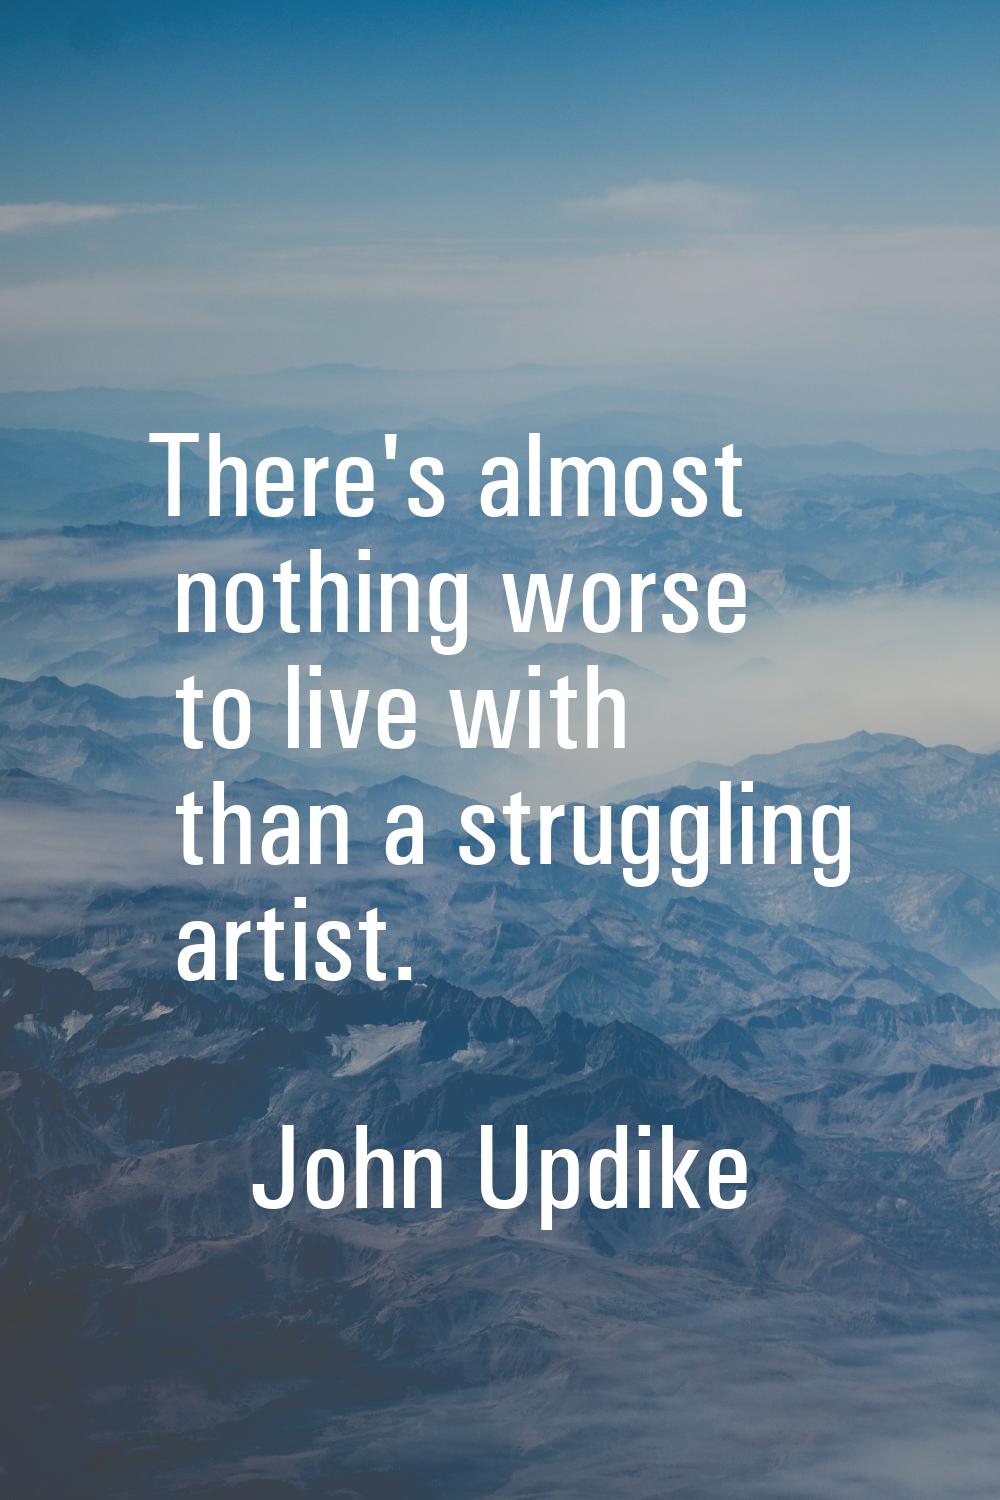 There's almost nothing worse to live with than a struggling artist.